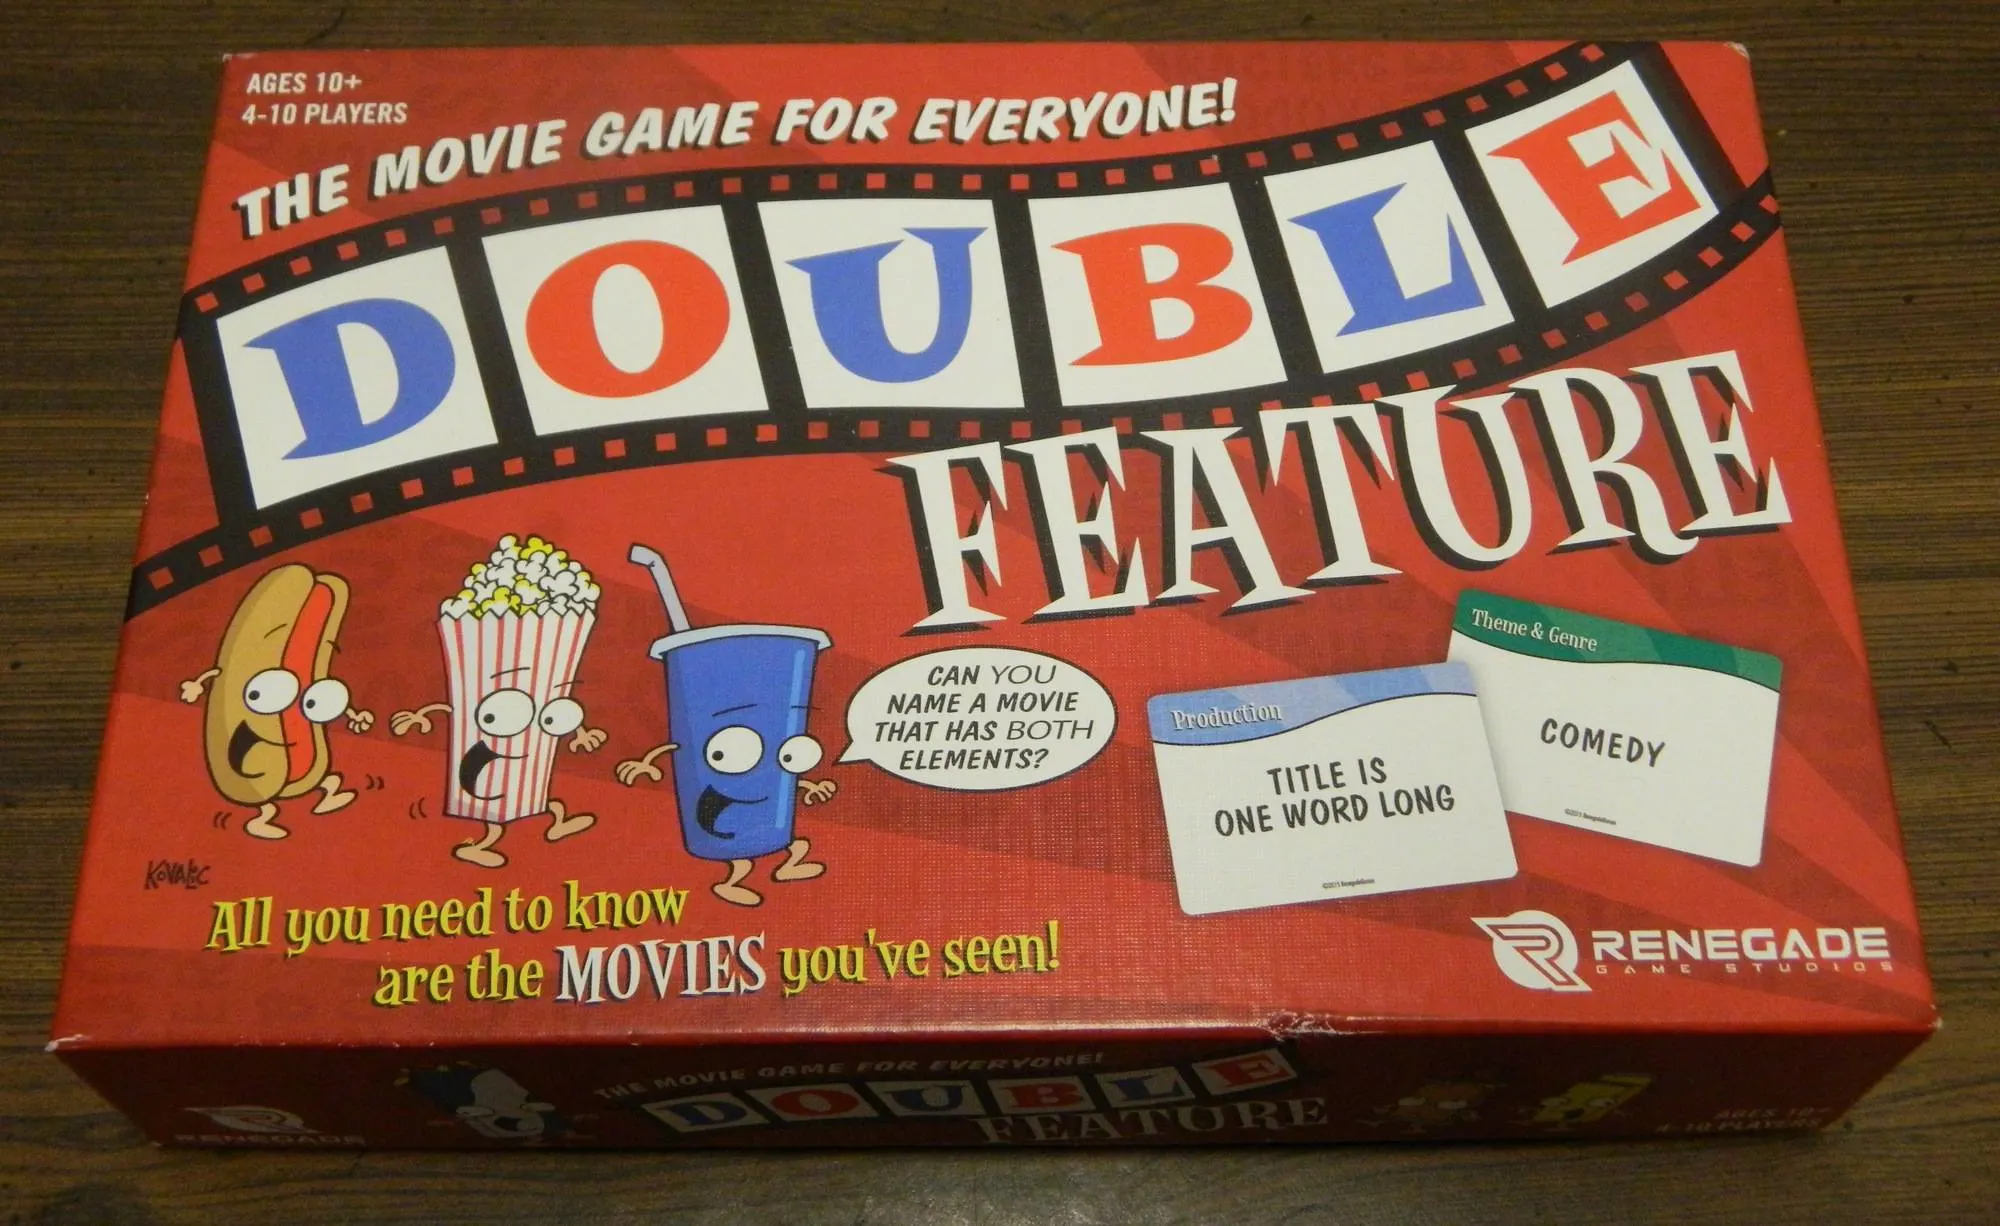 Box for Double Features